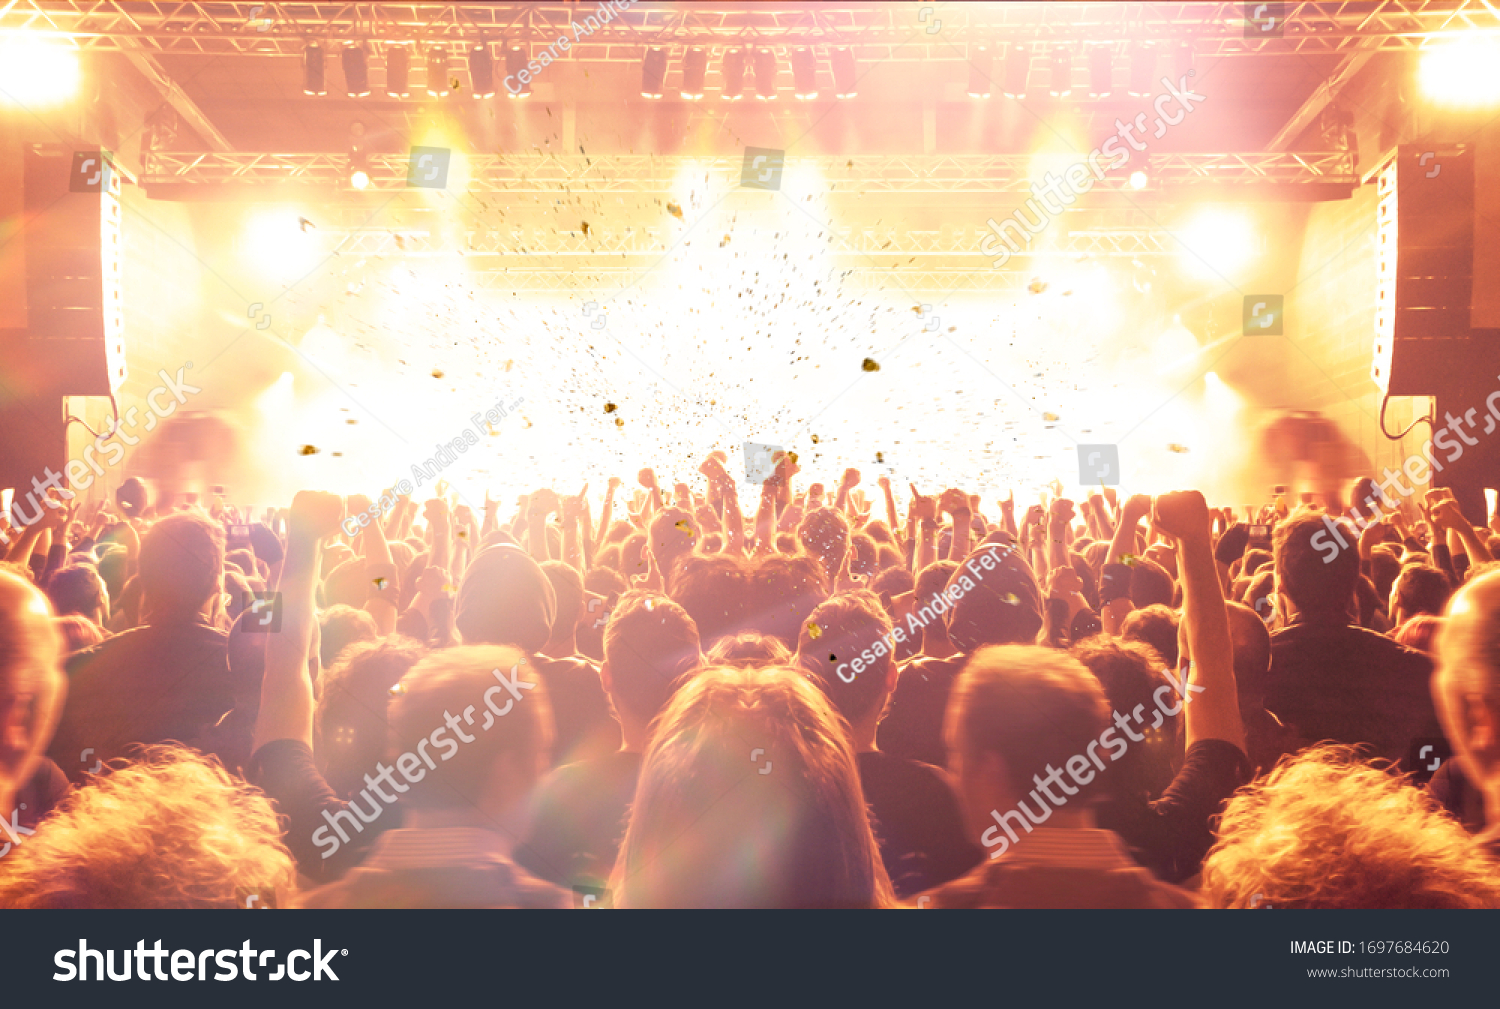 Music festival crowd,concert spectators in front of a bright stage with live music #1697684620